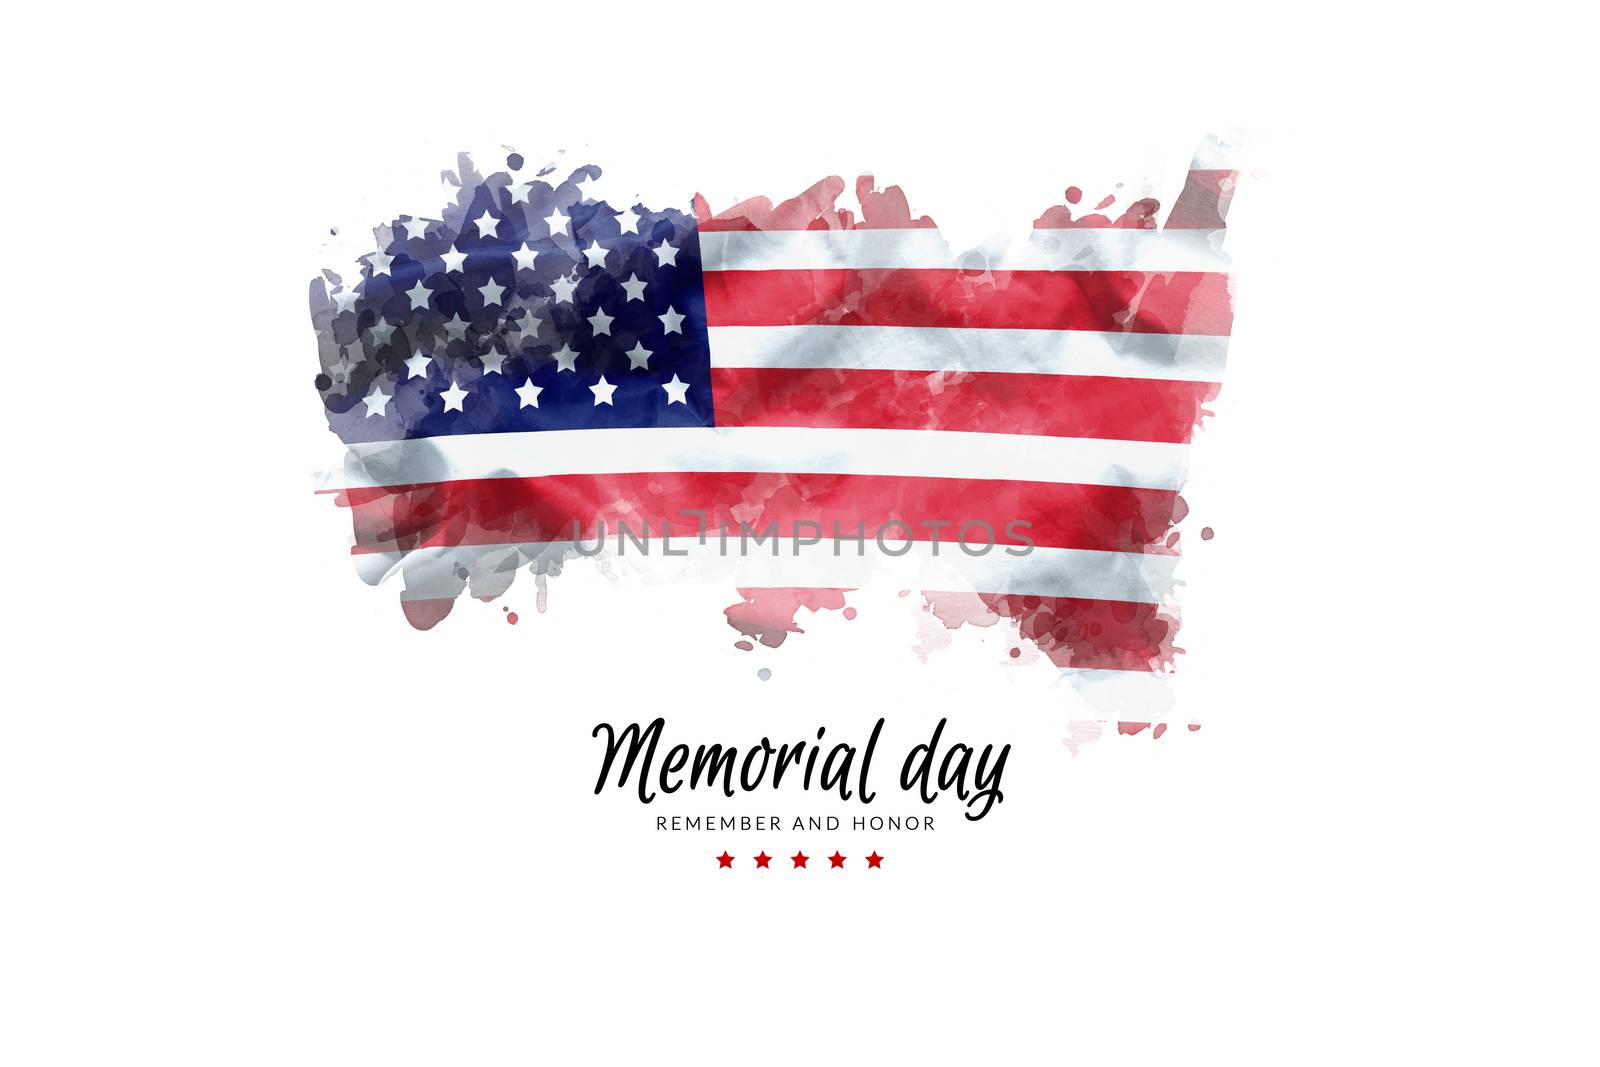 Memorial Day background illustration. text Memorial Day, remembe by asiandelight